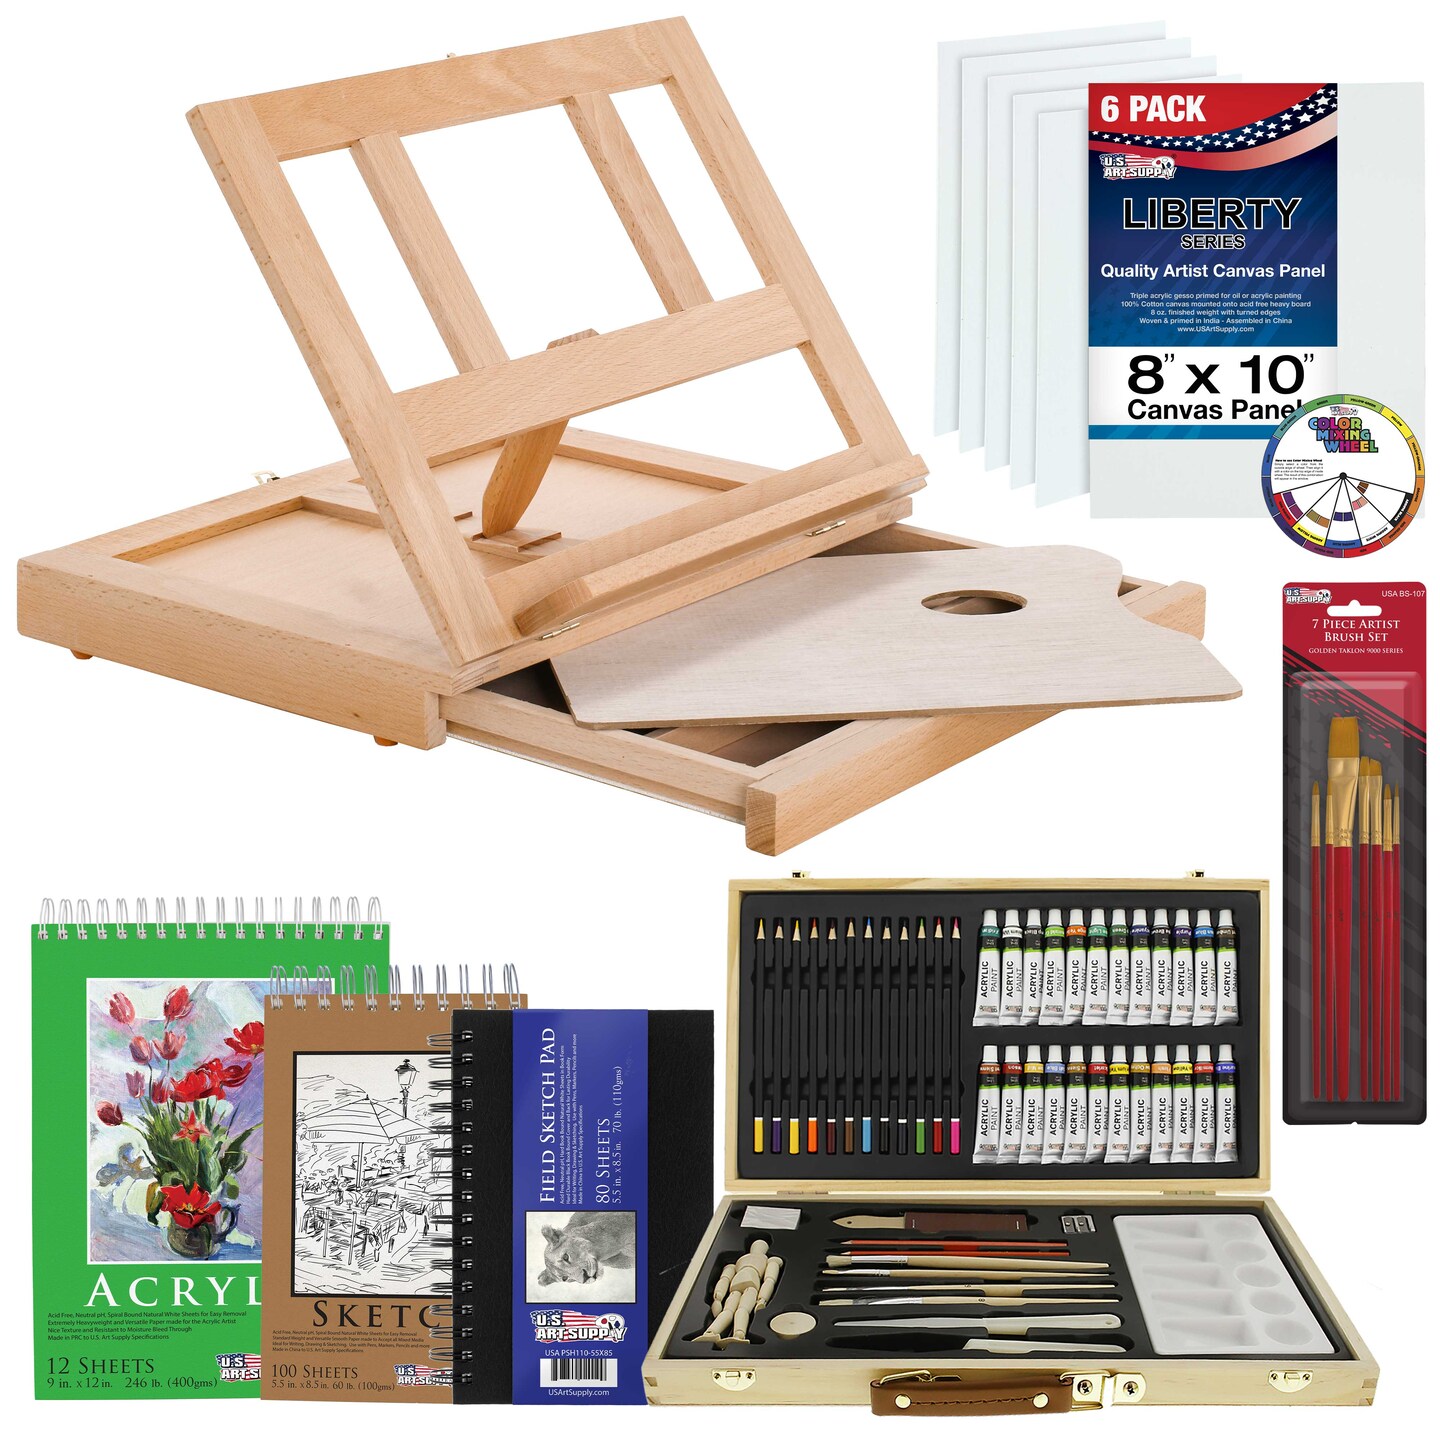 U.S. Art Supply 68-Piece Artist Painting &#x26; Drawing Case Set, Wooden Table Easel, 24 Acrylic Paint, 6 Canvases, Brushes, 12 Colored Pencils Sketch Pads